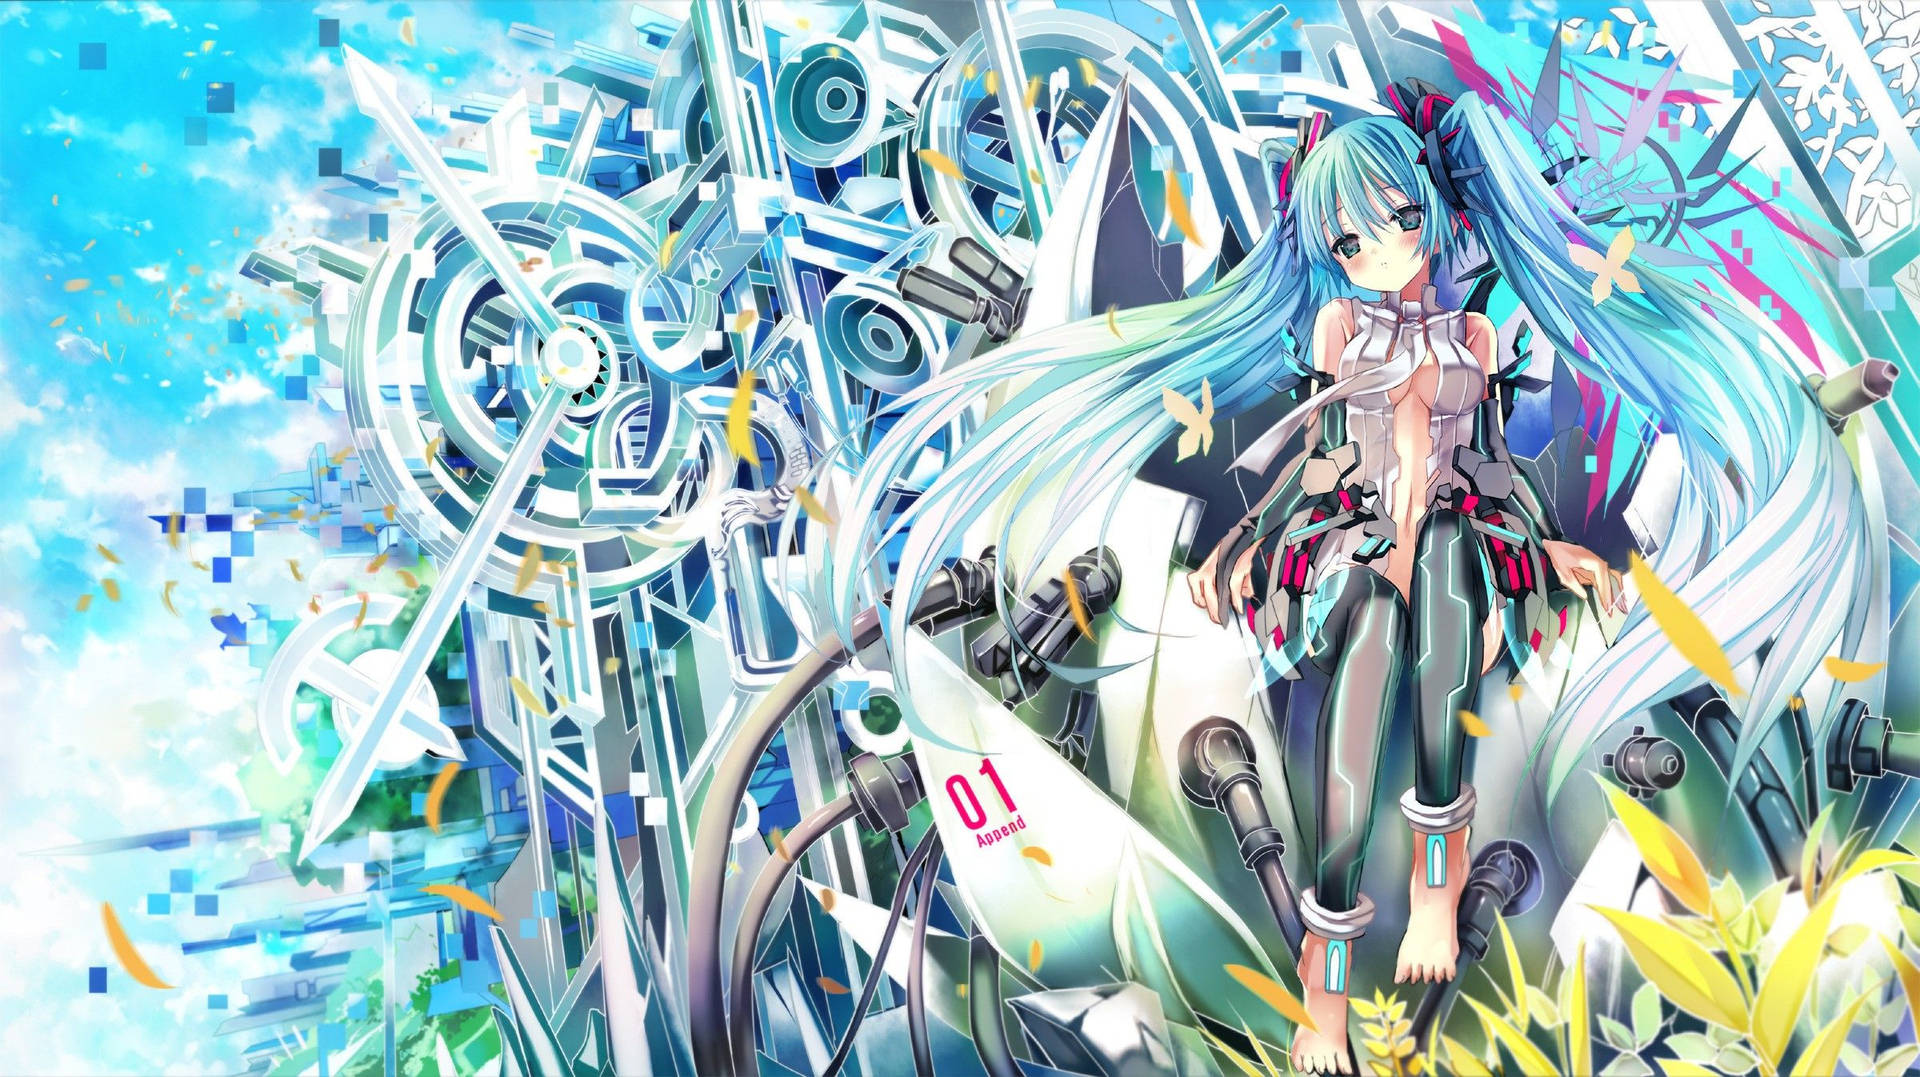 Immerse yourself in the world of Hatsune Miku with this cool artwork! Wallpaper